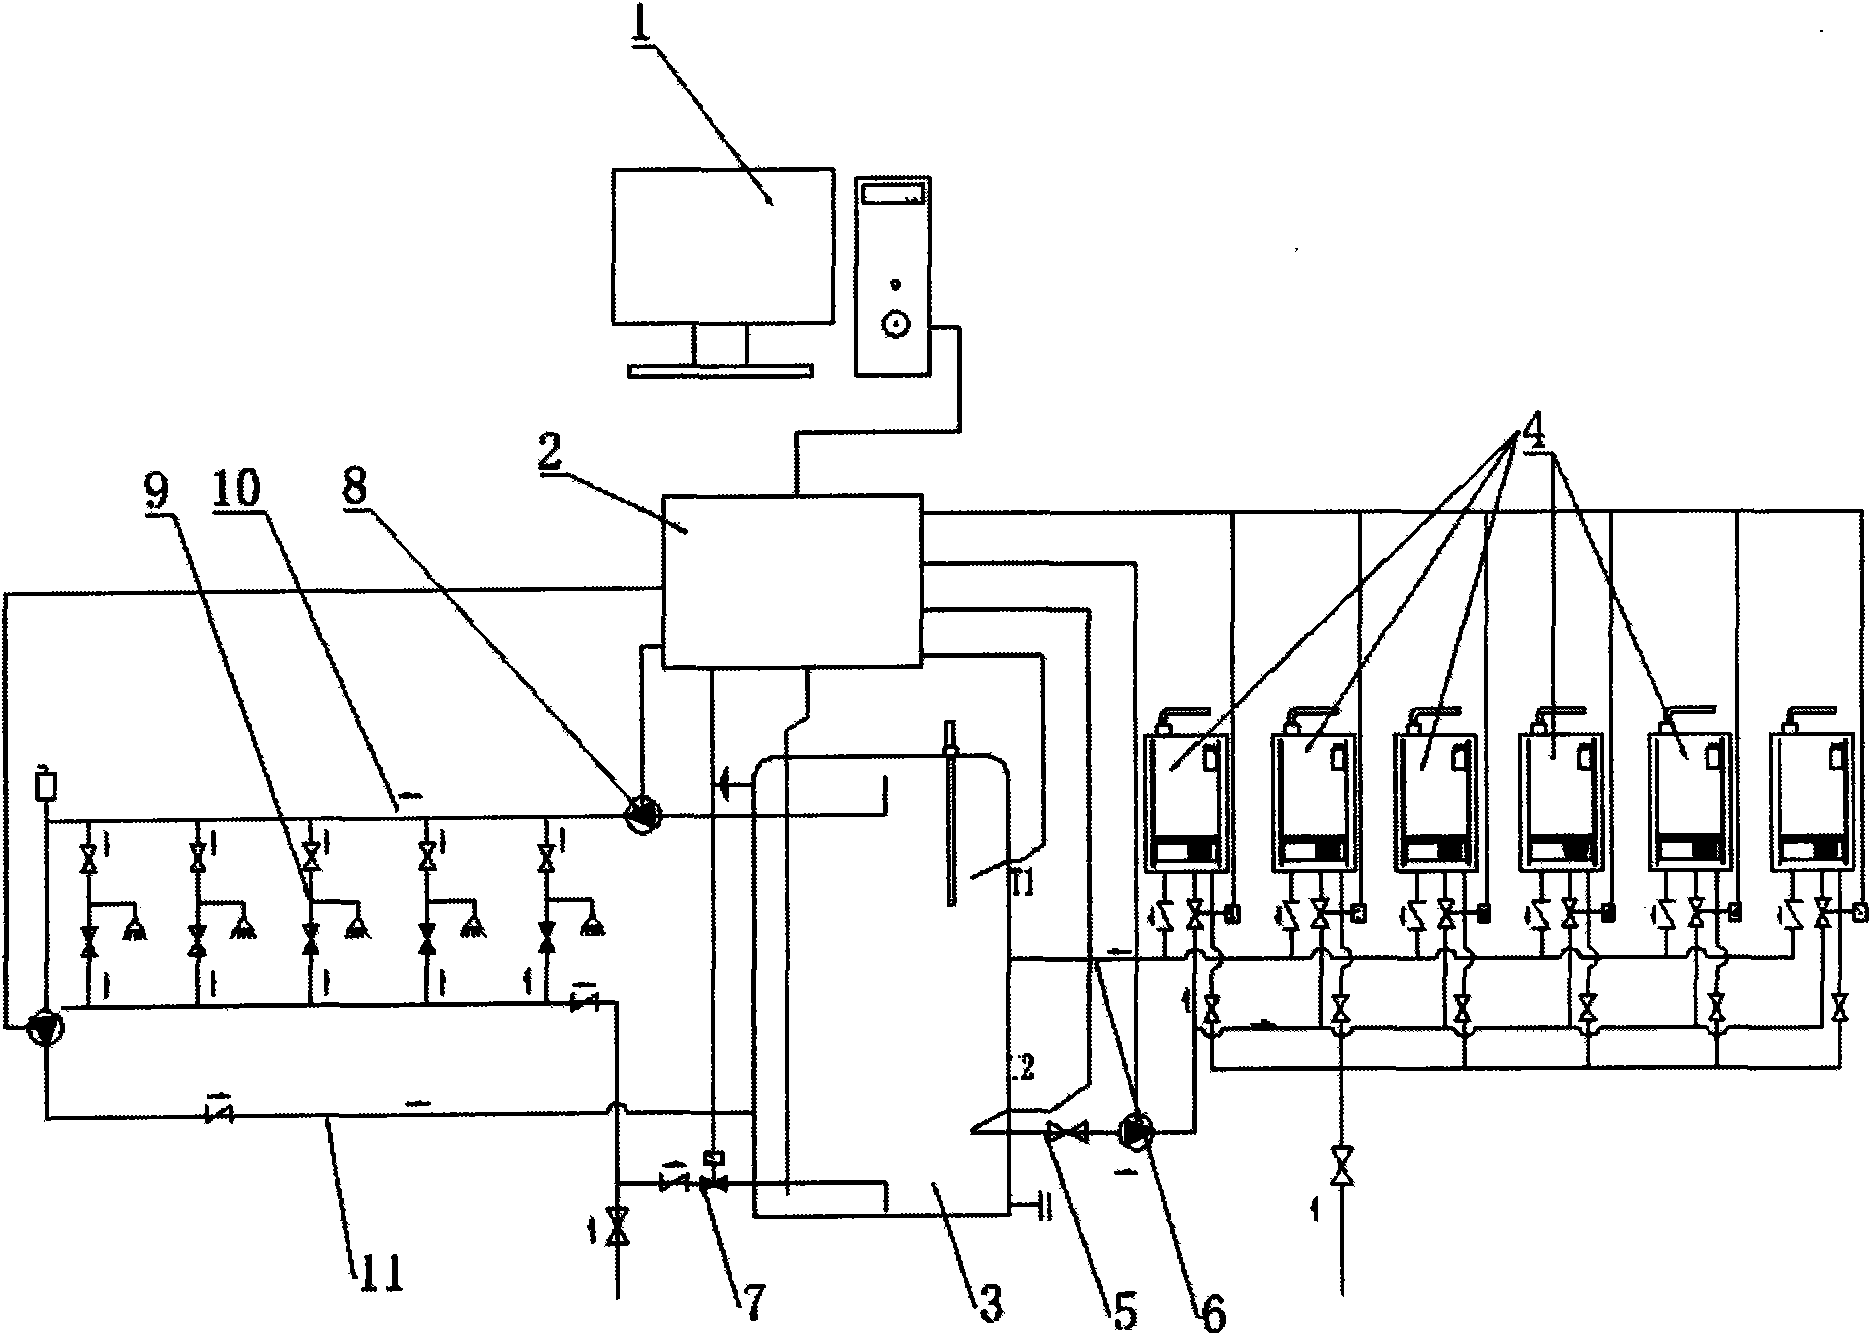 Method and system for parallel connection of multiple gas heaters